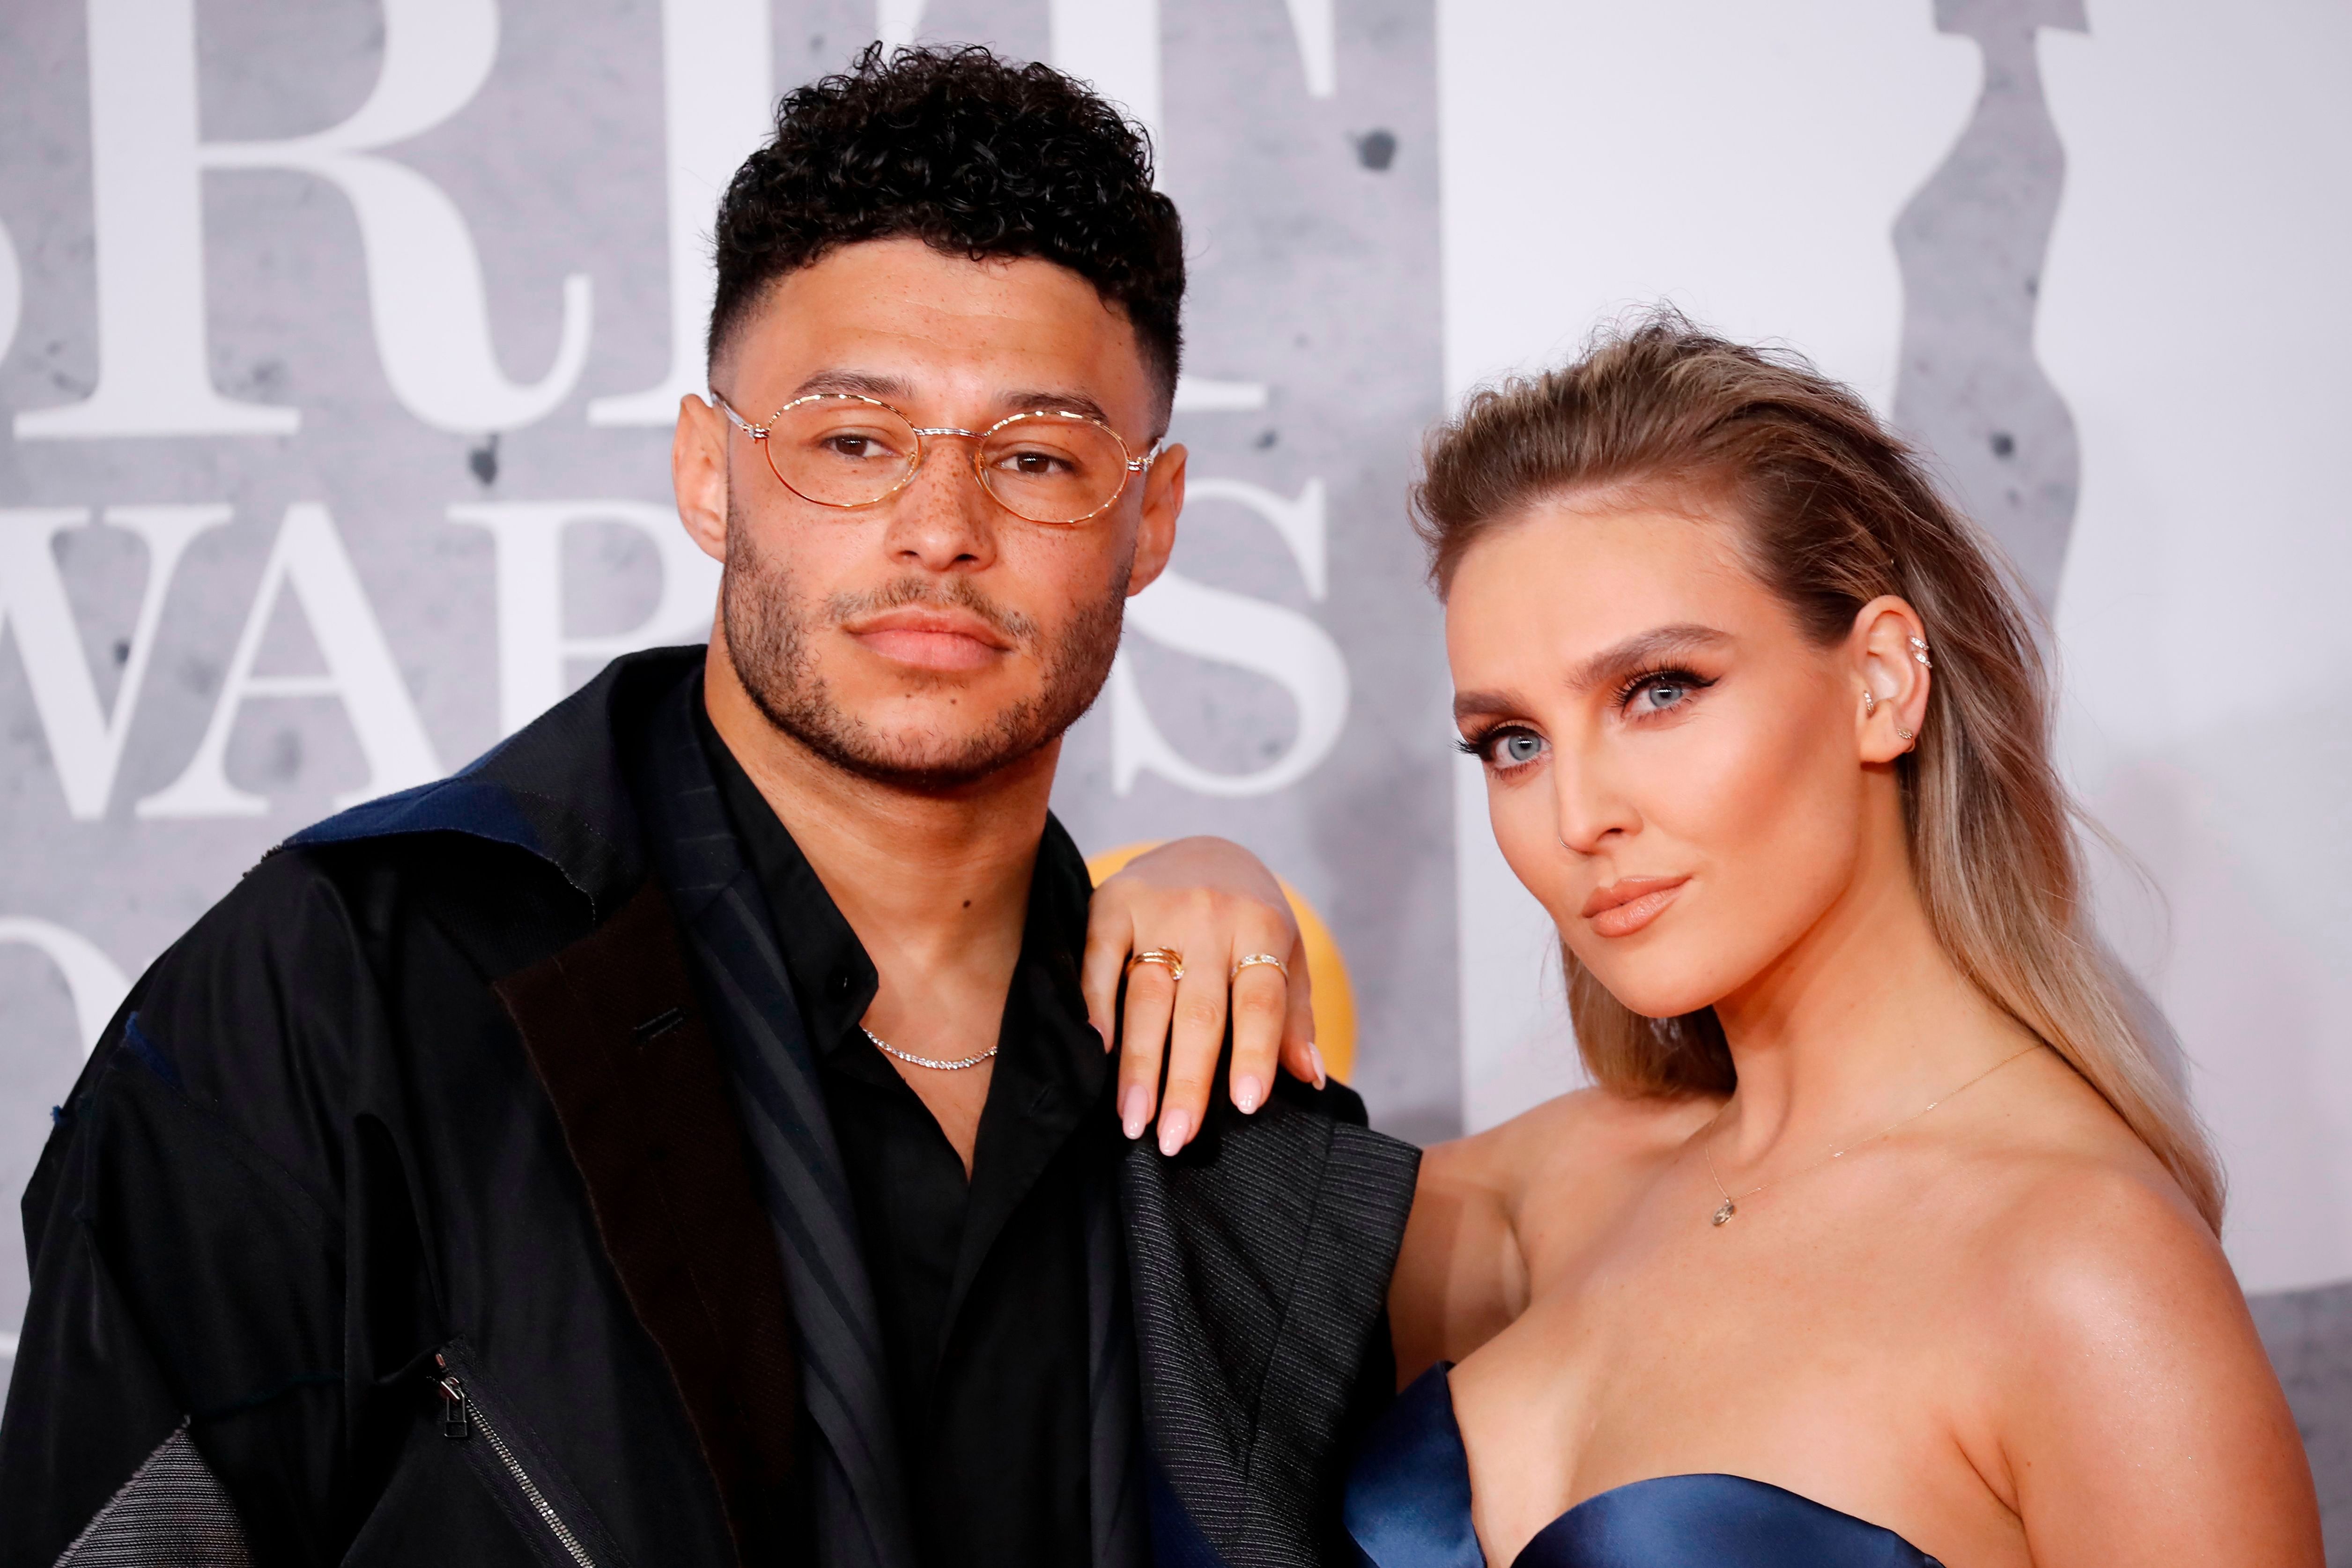 Alex Oxlade-Chamberlain and Perrie Edwards at the BRIT Awards in London on February 20, 2019 | Photo: Tolga Akmen/AFP/Getty Images